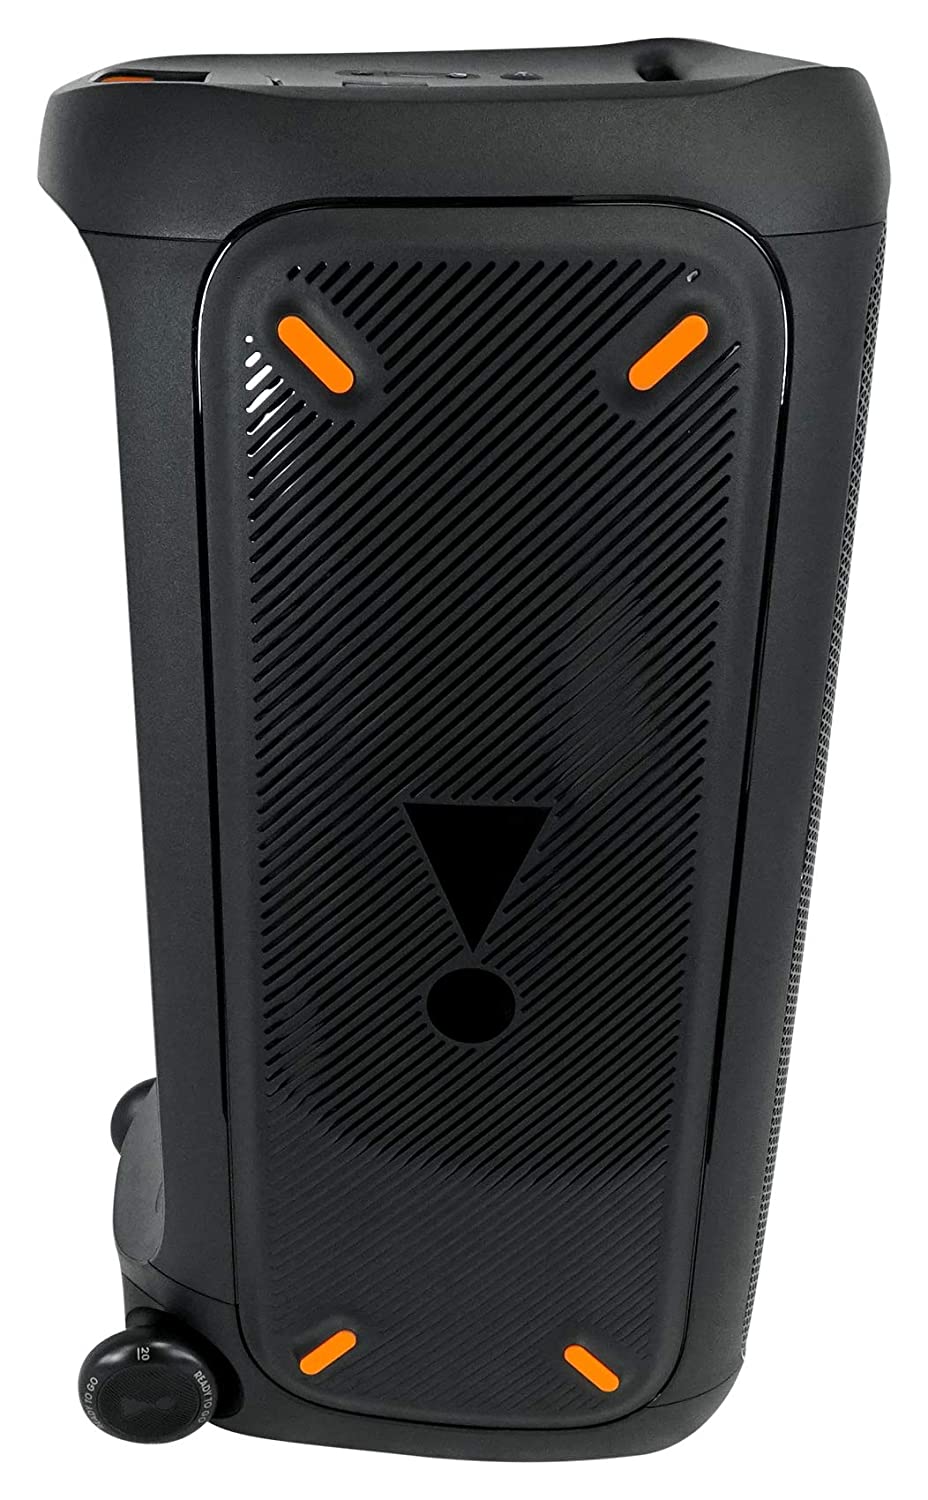 JBL Partybox 310 - Portable Party Speaker with Long Lasting Battery, Powerful JBL Sound and Exciting Light Show - Mahajan Electronics Online